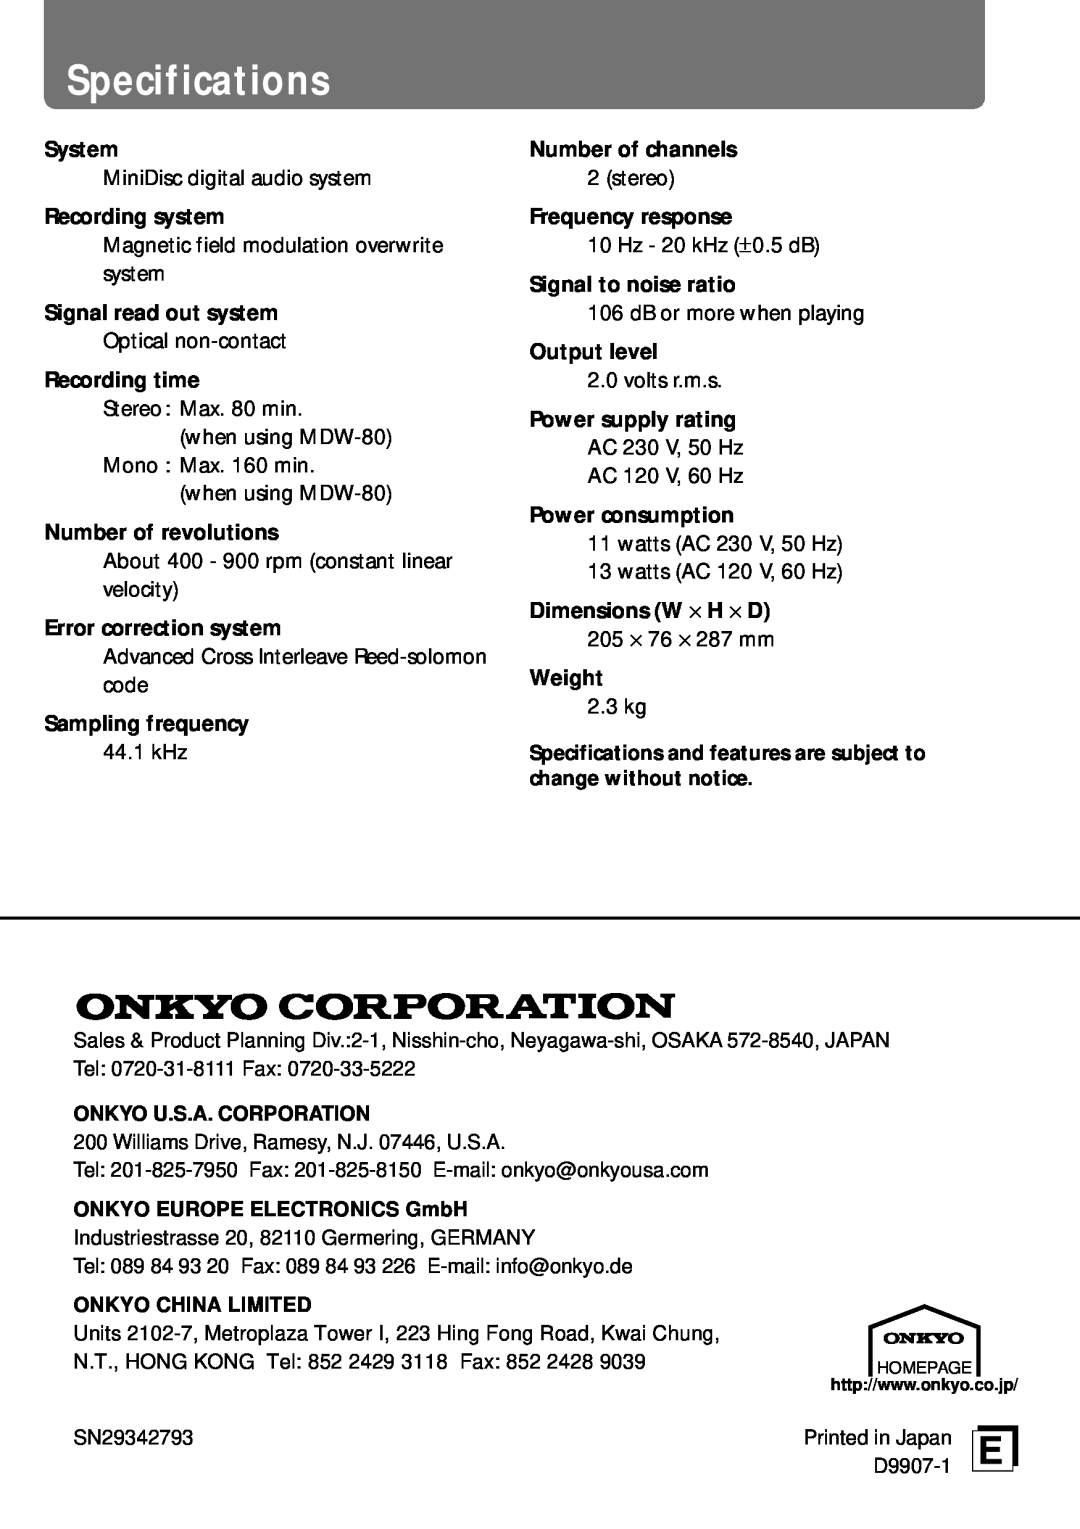 Onkyo MD-105X Specifications, System, Recording system, Signal read out system, Recording time, Number of revolutions 